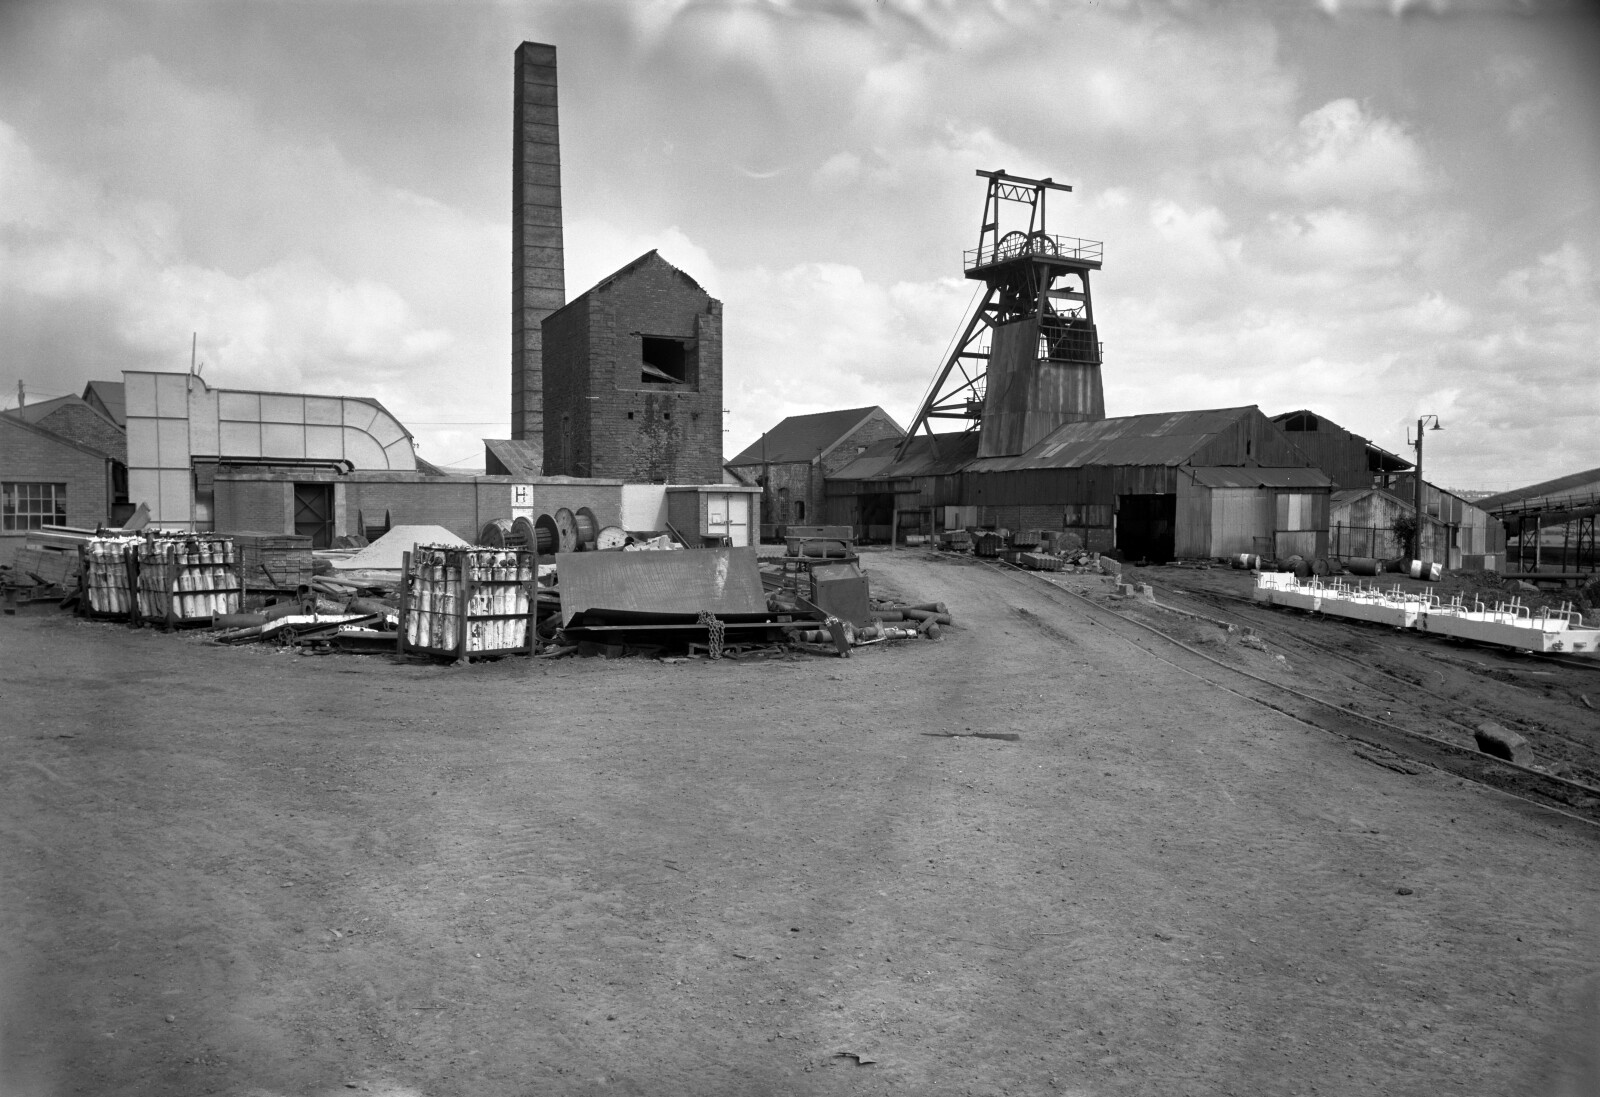 Morlais Colliery, a general view, note the derelict engine pumping house, 1978